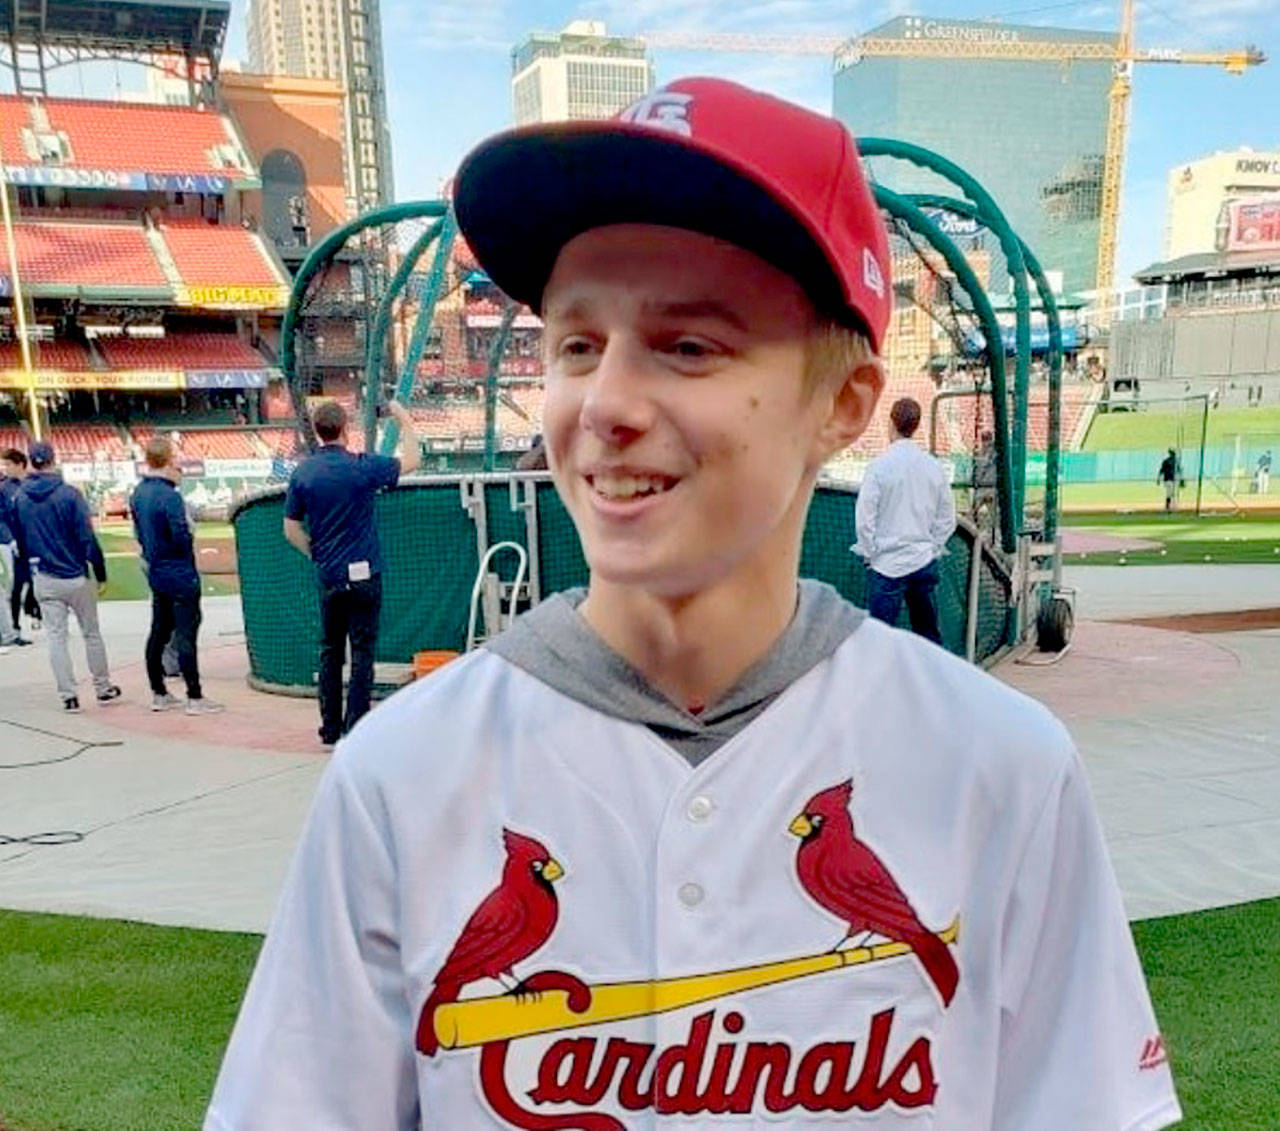 Doctors told Josh Bangert, 15, of West Chicago, Illinois, that he will lose his vision in a few months. (Keith Bangert)